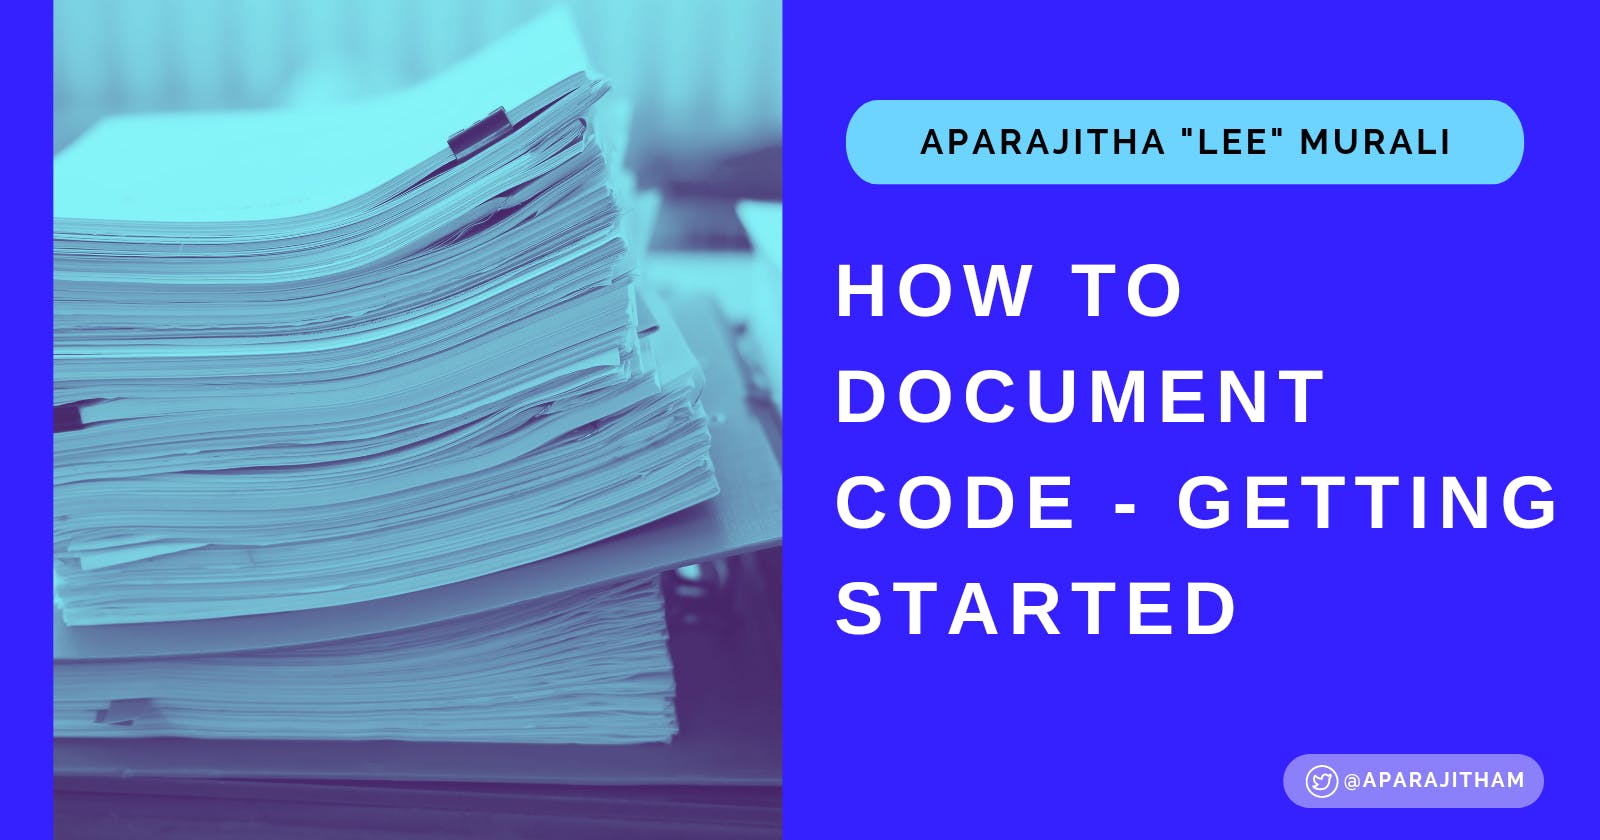 How to document code - getting started